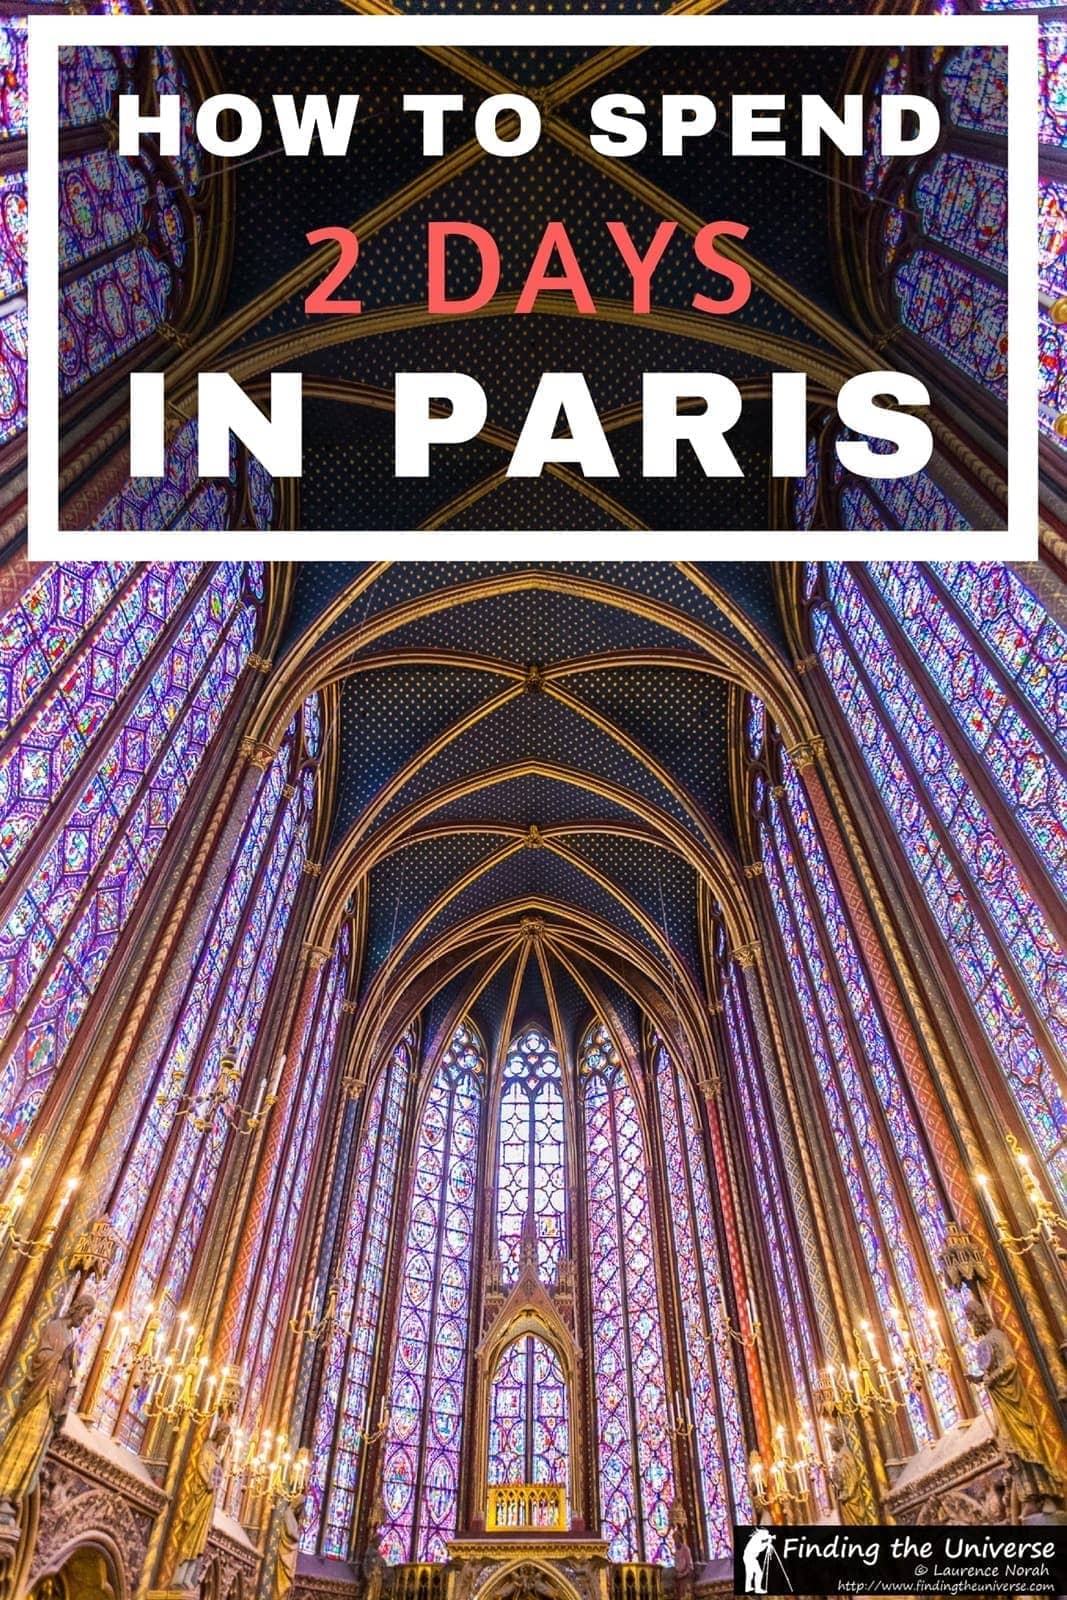 2 days in Paris - everything you need to know for the perfect visit to Paris, including what to see, how to save money, tips for your stay and more!